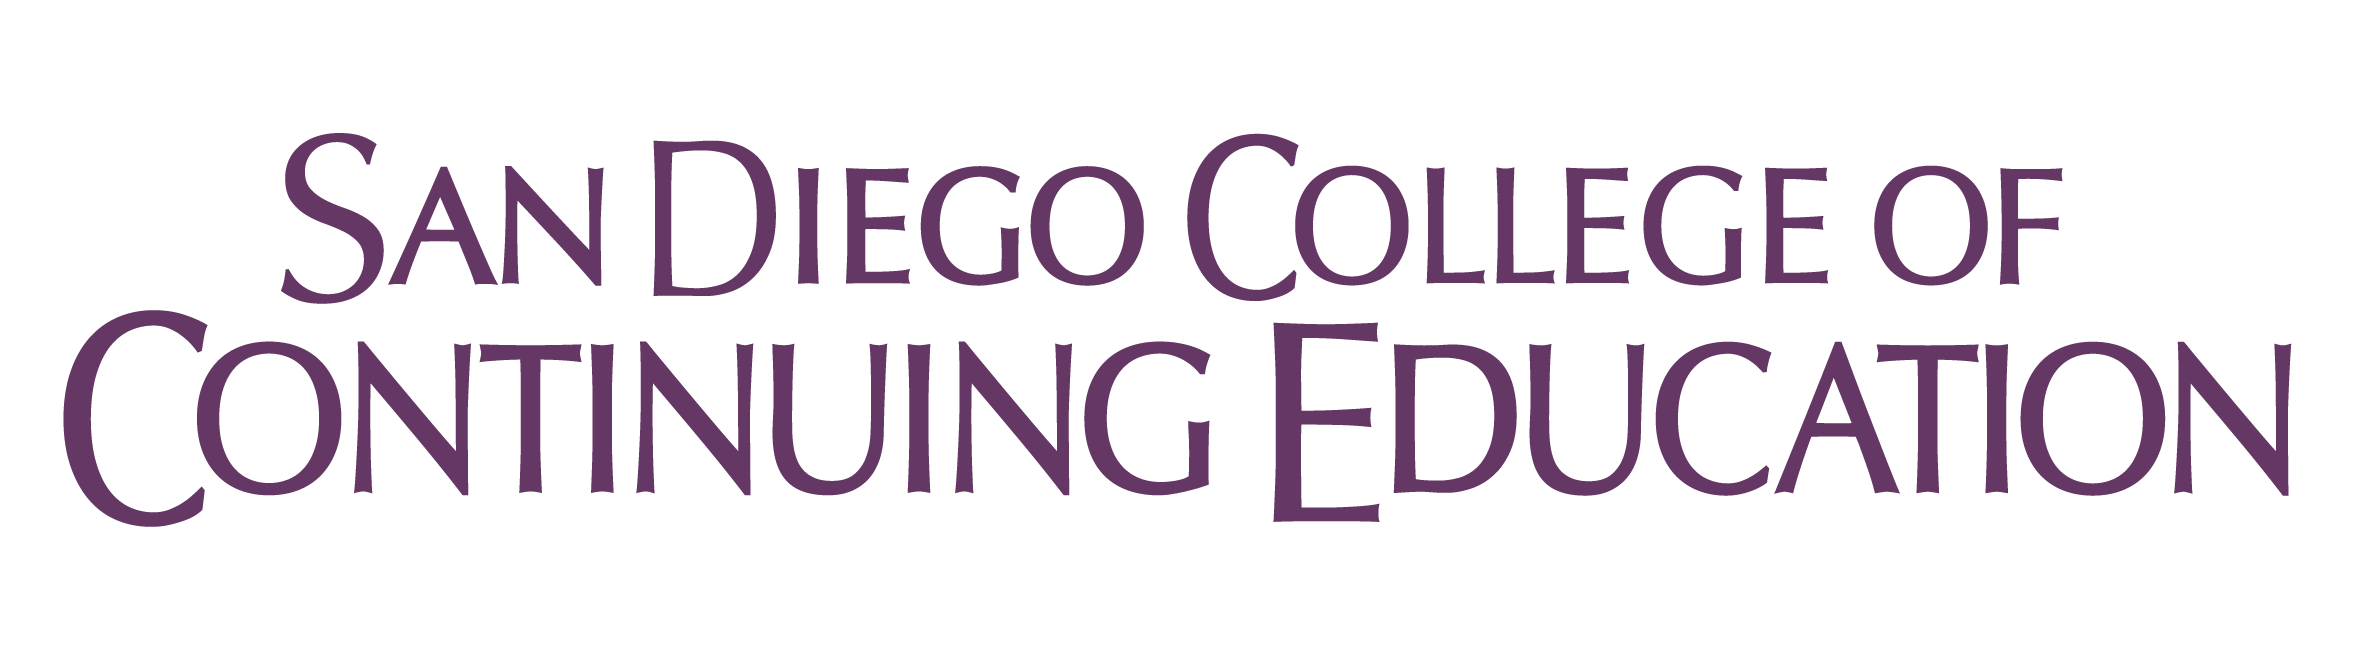 San Diego College of Continuing Education primary